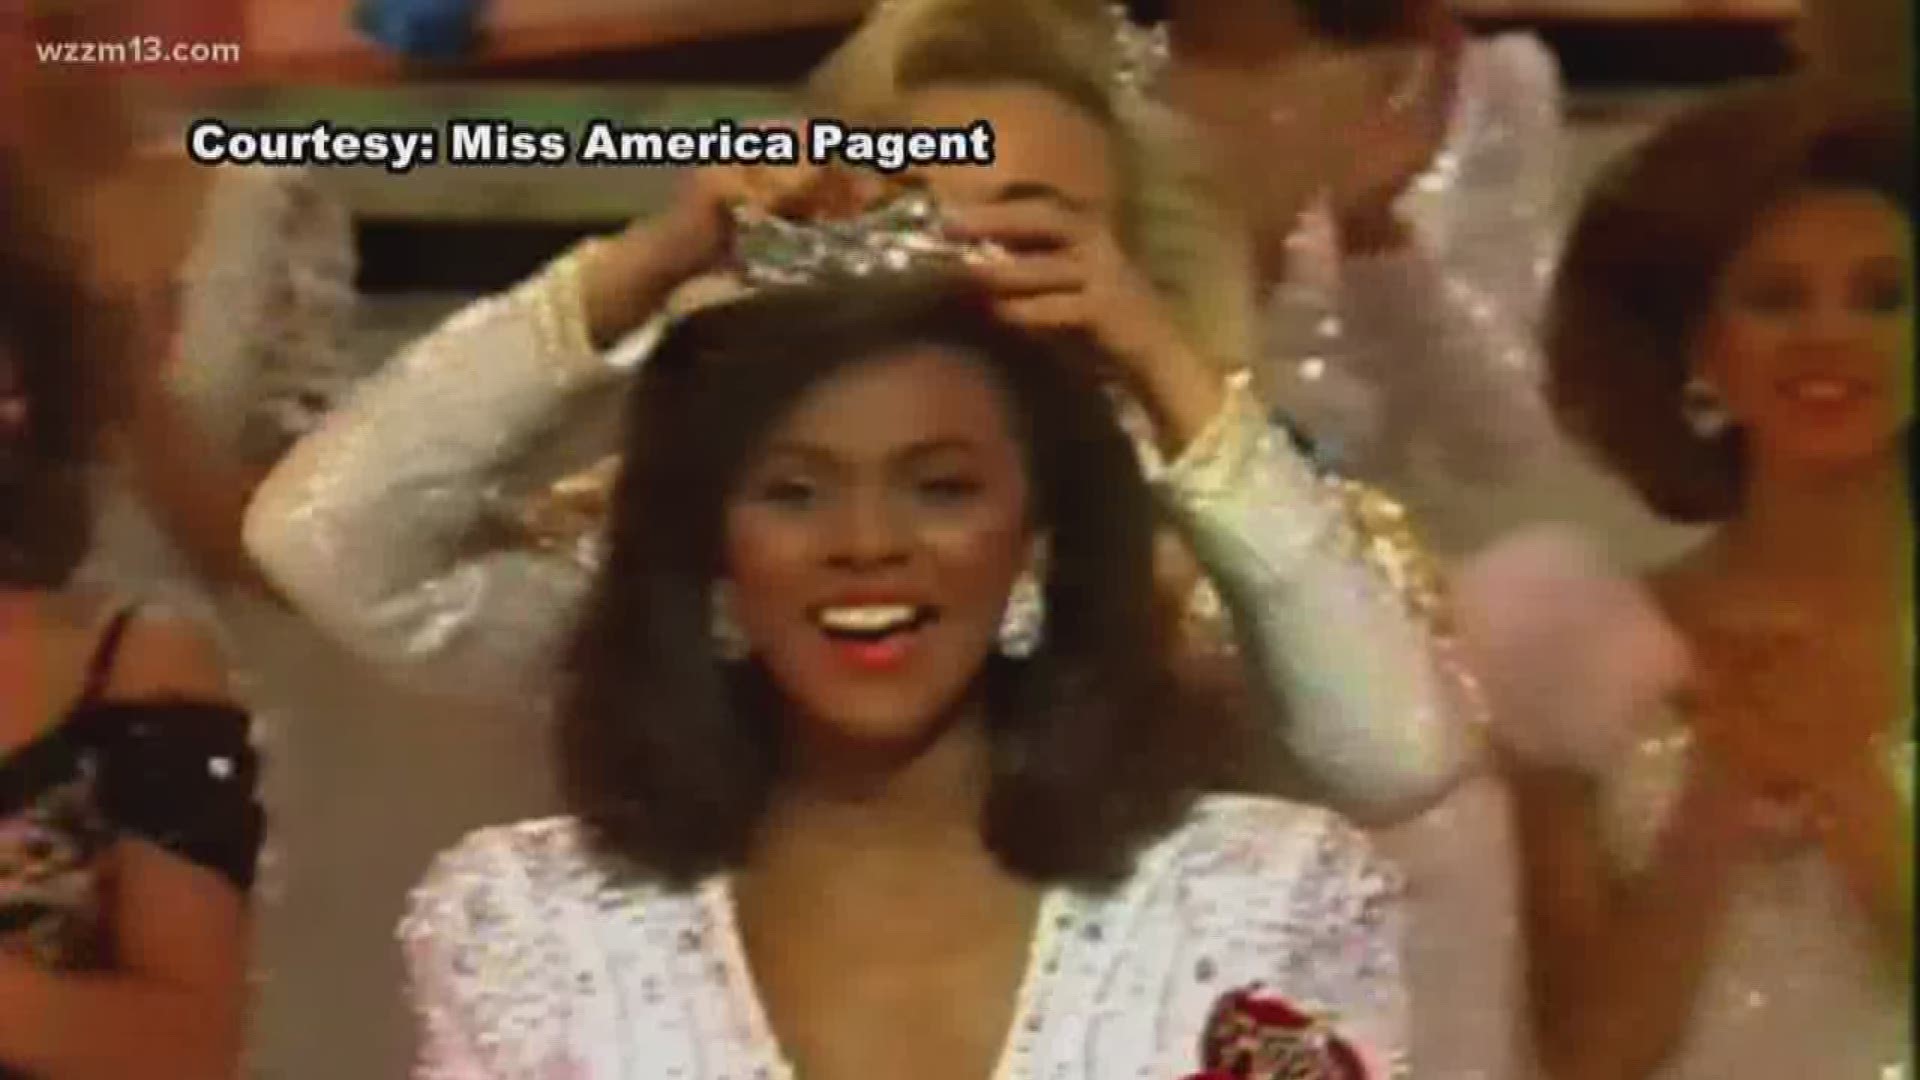 Seeing You; A former Miss America describes the pressure to look pretty